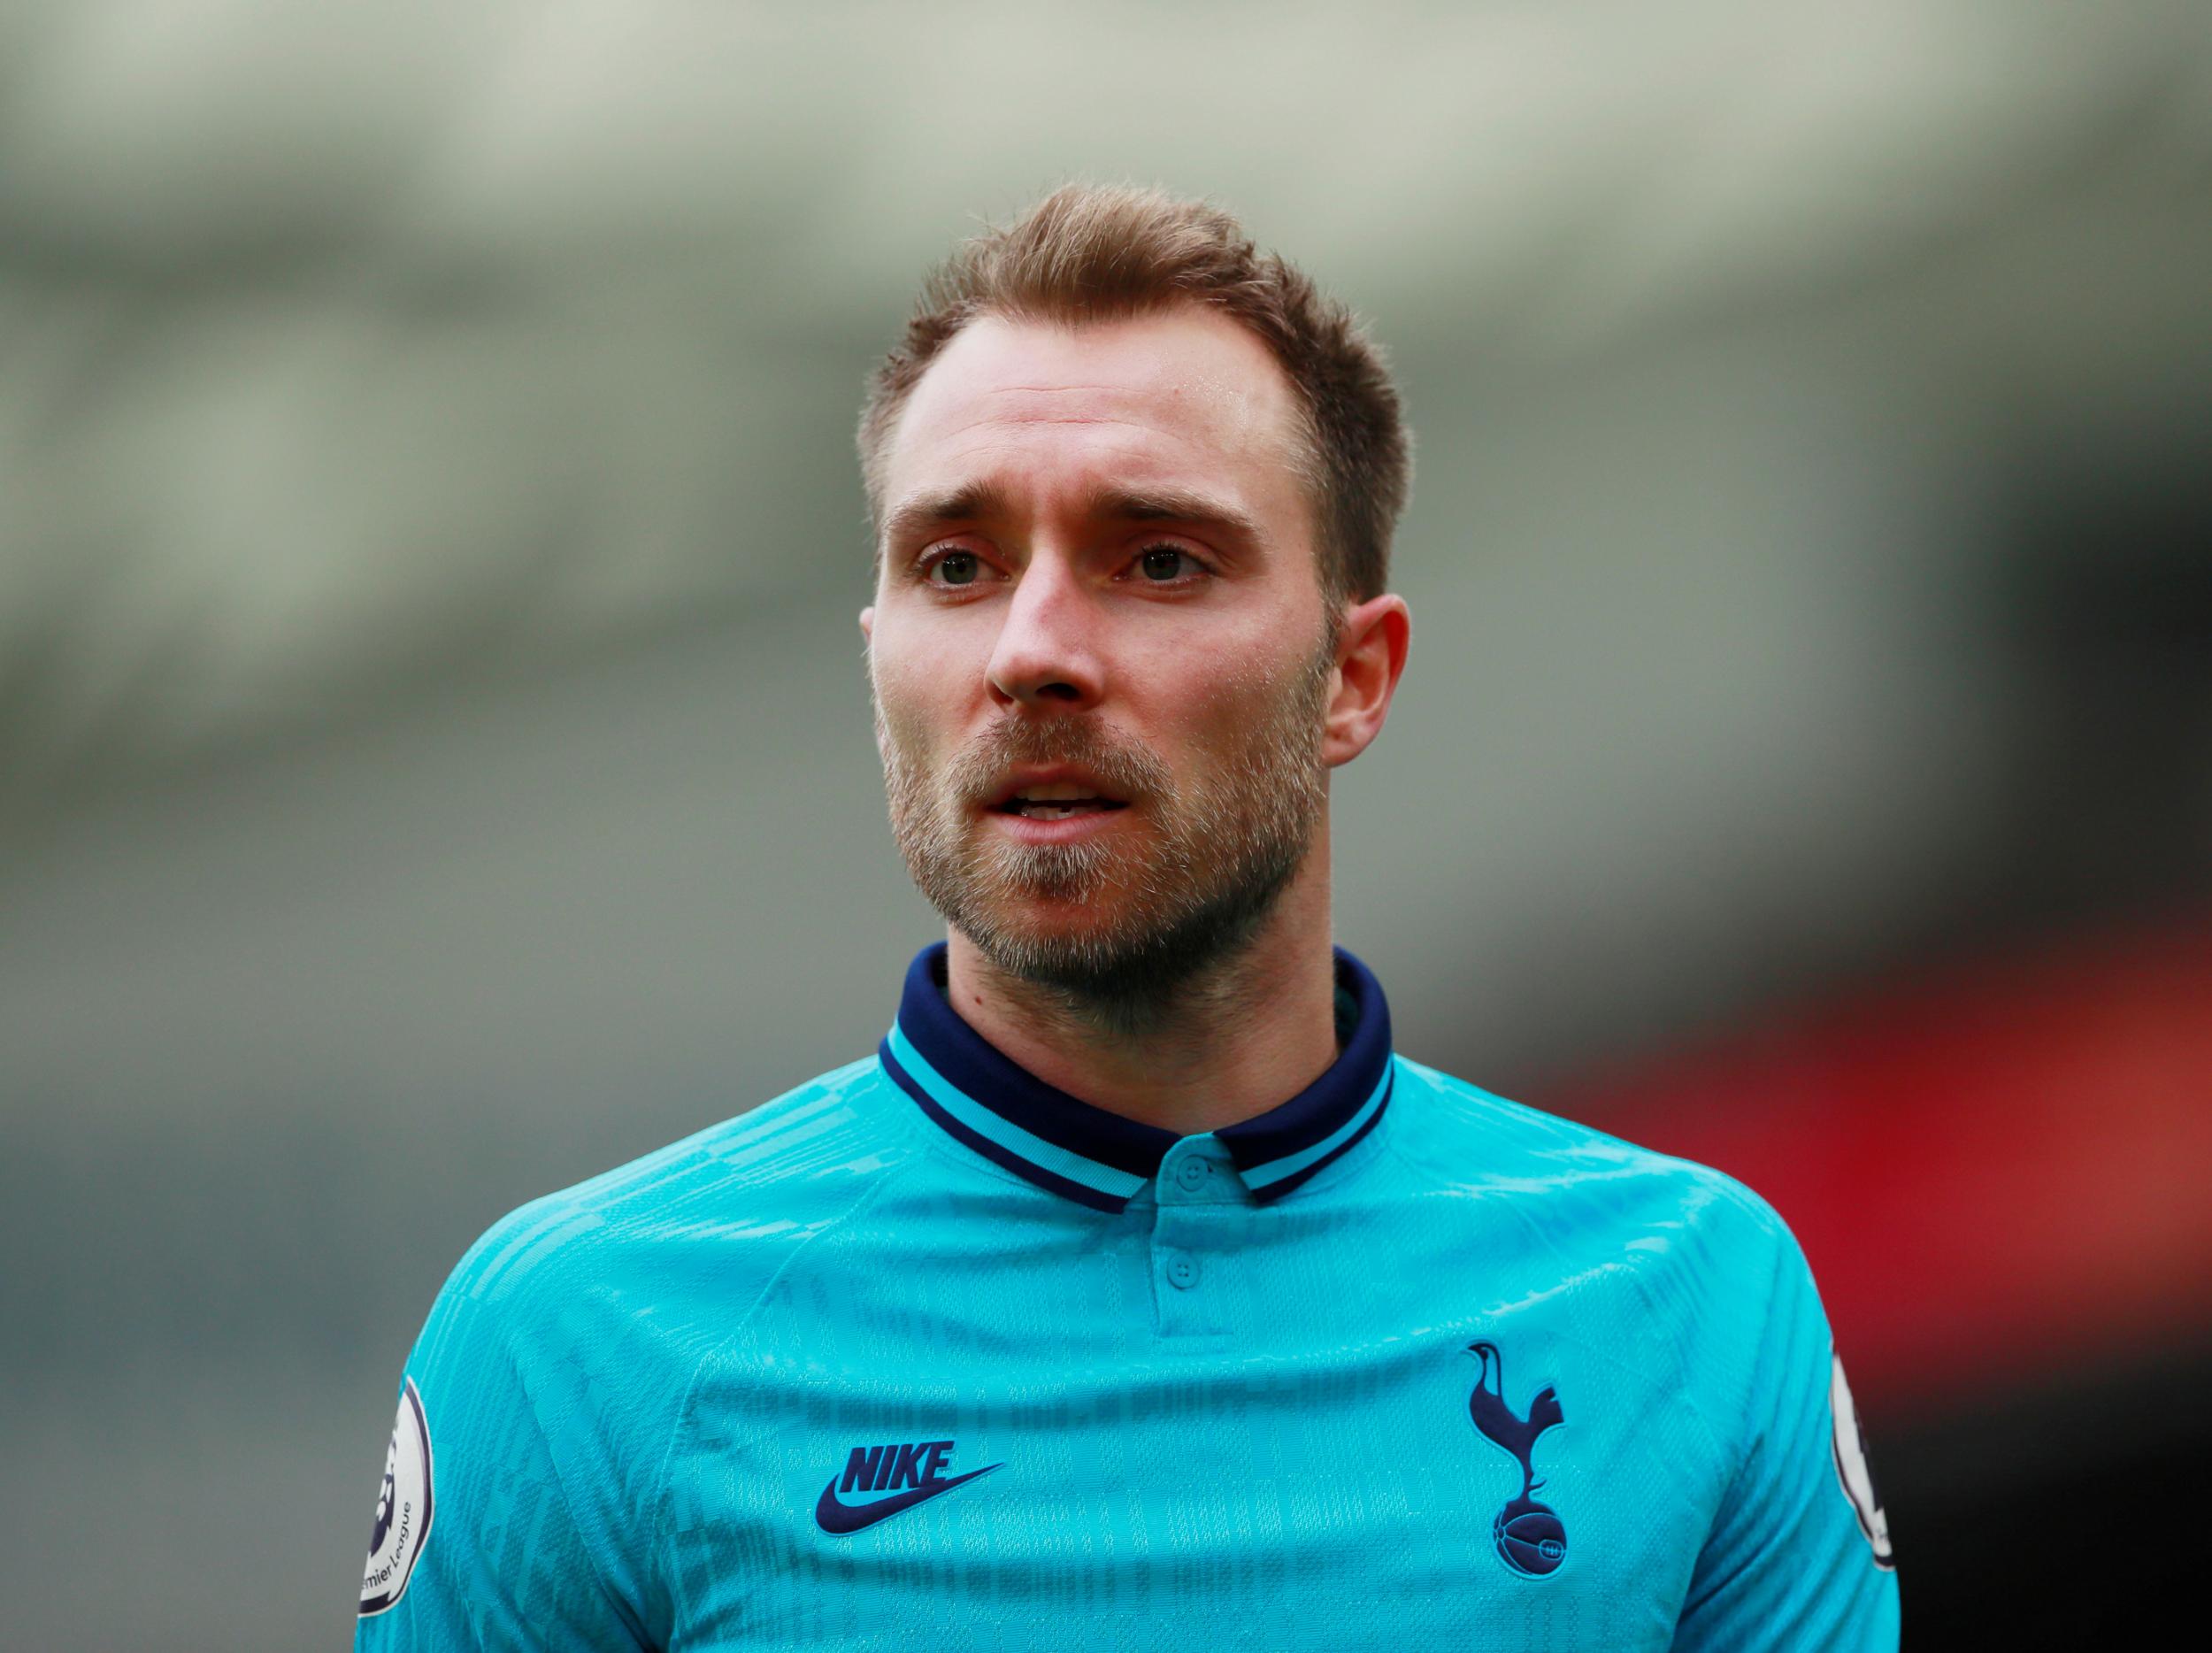 Christian Eriksen has made a poor start to the new season